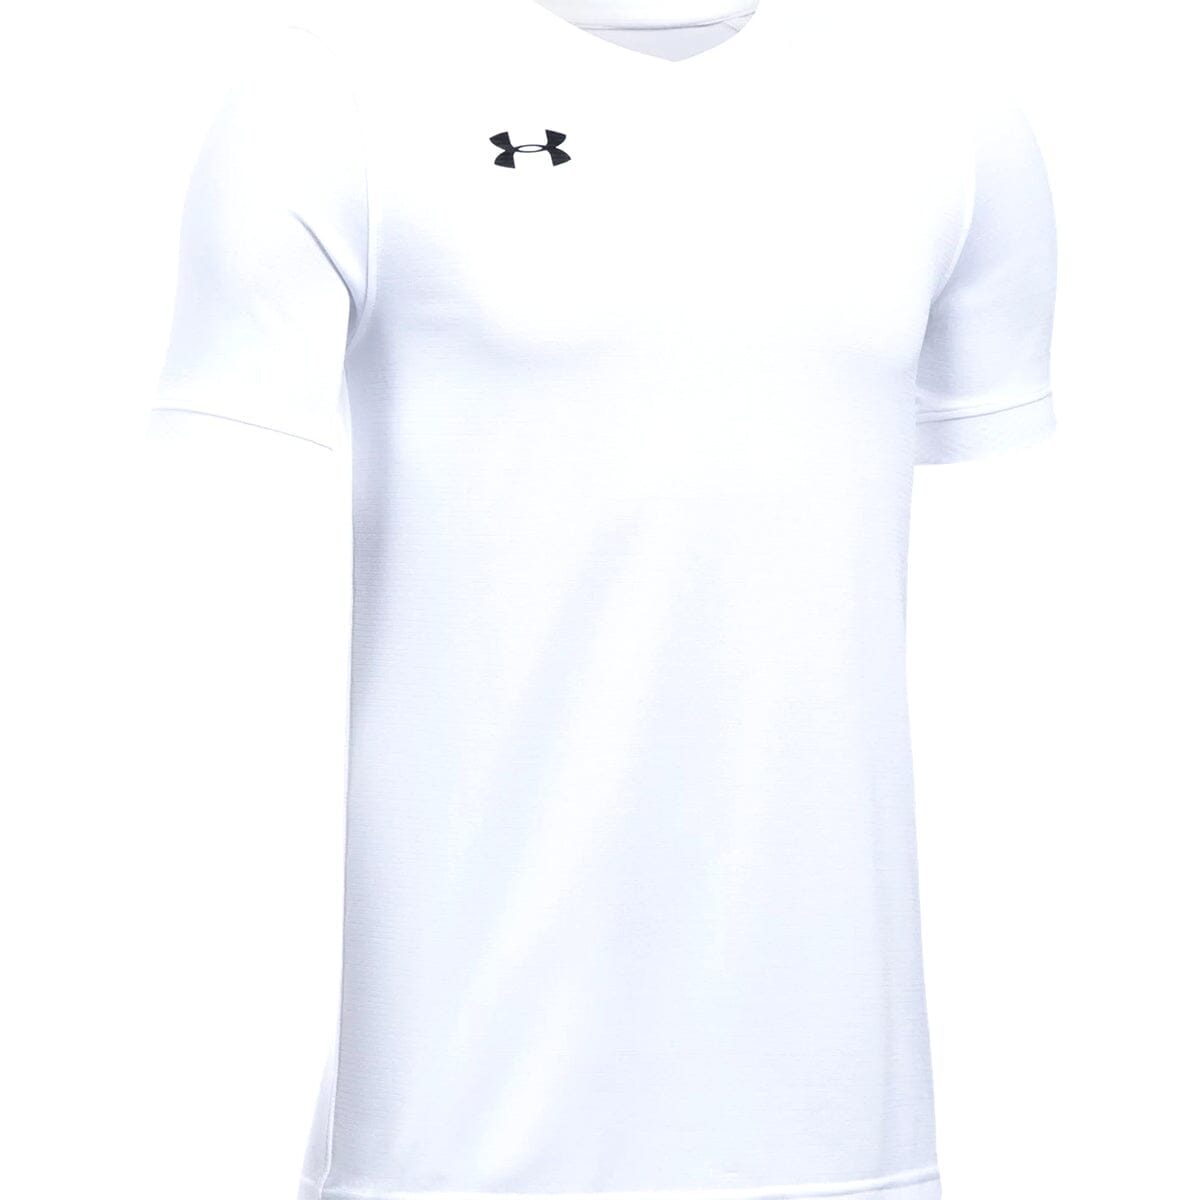 Under Armour Men's Soccer Jersey Team Jerseys Under Armour WHITE Small 